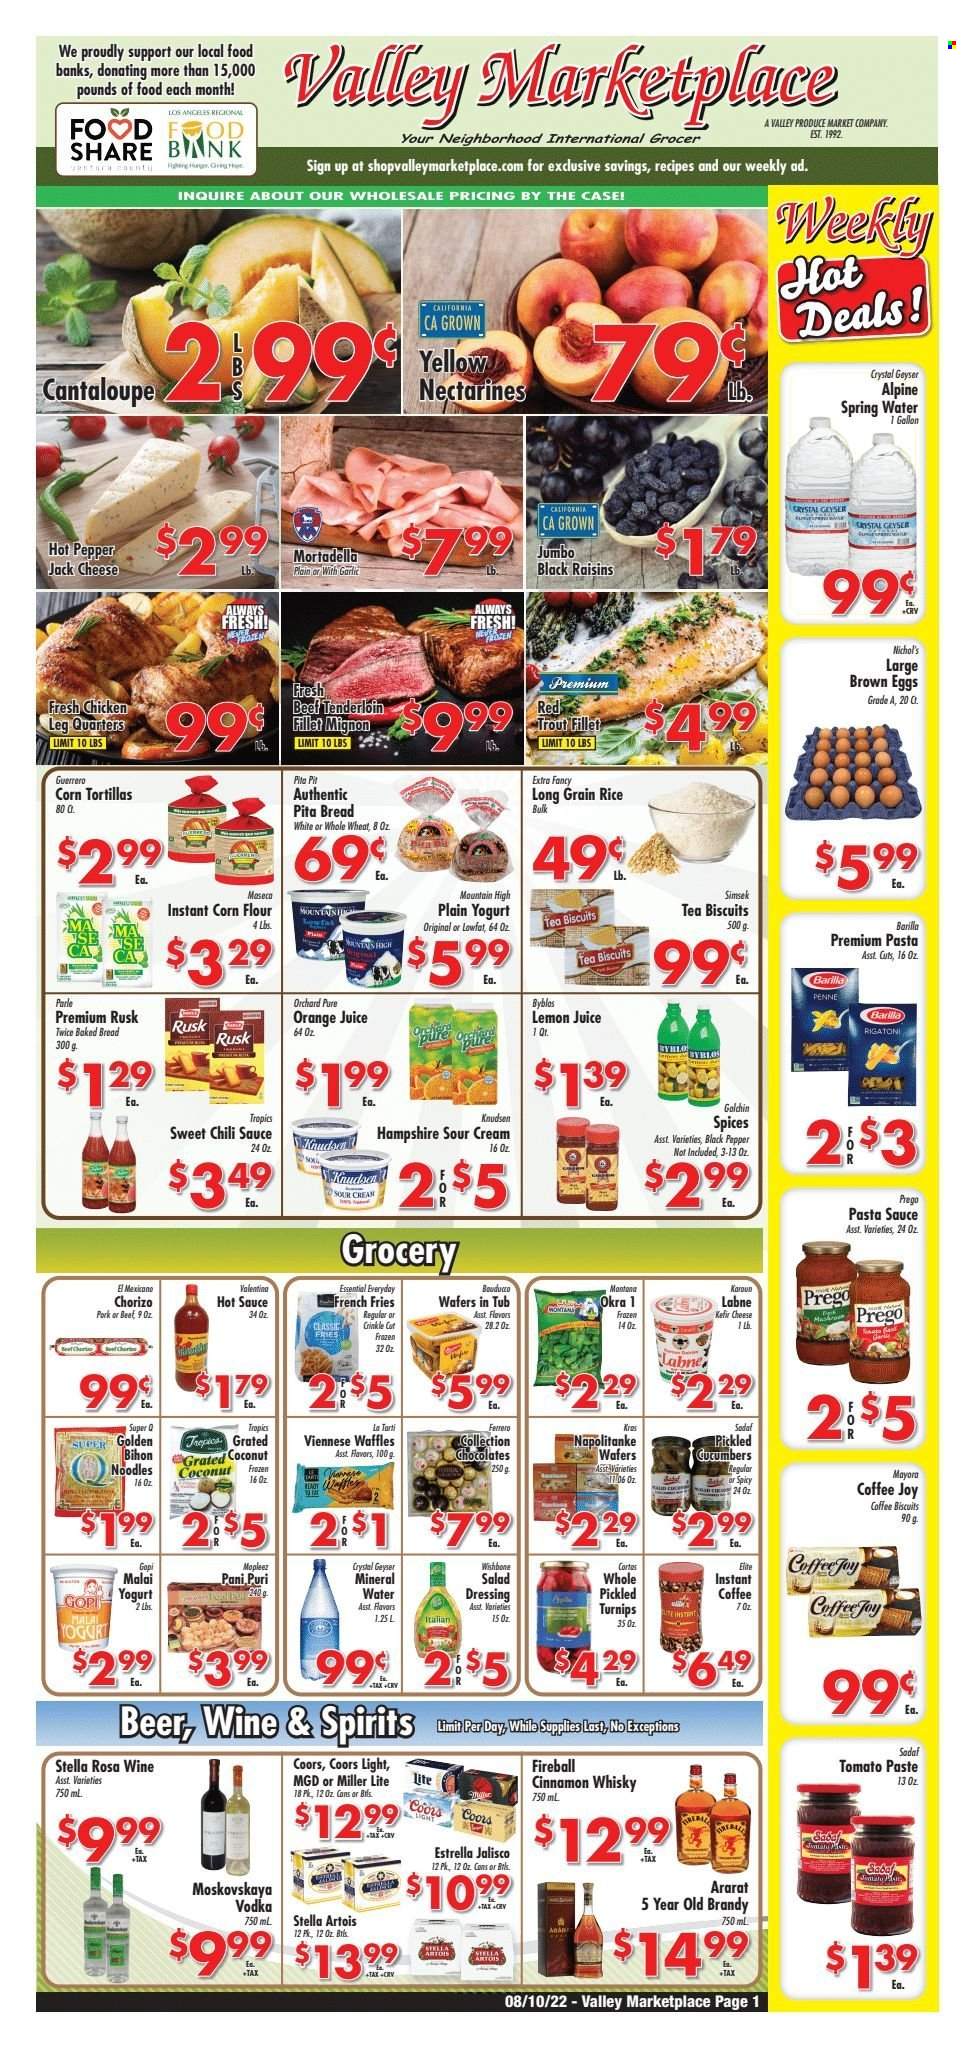 thumbnail - Valley Marketplace Flyer - 08/10/2022 - 08/16/2022 - Sales products - bread, corn tortillas, tortillas, pita, waffles, rusks, cantaloupe, okra, salad, coconut, trout, pasta sauce, sauce, Barilla, noodles, mortadella, chorizo, Pepper Jack cheese, labneh, yoghurt, kefir, eggs, sour cream, potato fries, french fries, wafers, chocolate, Ferrero Rocher, biscuit, Parle, corn flour, tomato paste, rice, penne, long grain rice, black pepper, spice, hot sauce, chilli sauce, dressing, raisins, dried fruit, orange juice, mineral water, spring water, lemon juice, tea, instant coffee, brandy, vodka, cinnamon whisky, whisky, beer, chicken legs, beef meat, beef tenderloin, Miller Lite, nectarines, Stella Artois, turnips, Coors. Page 1.